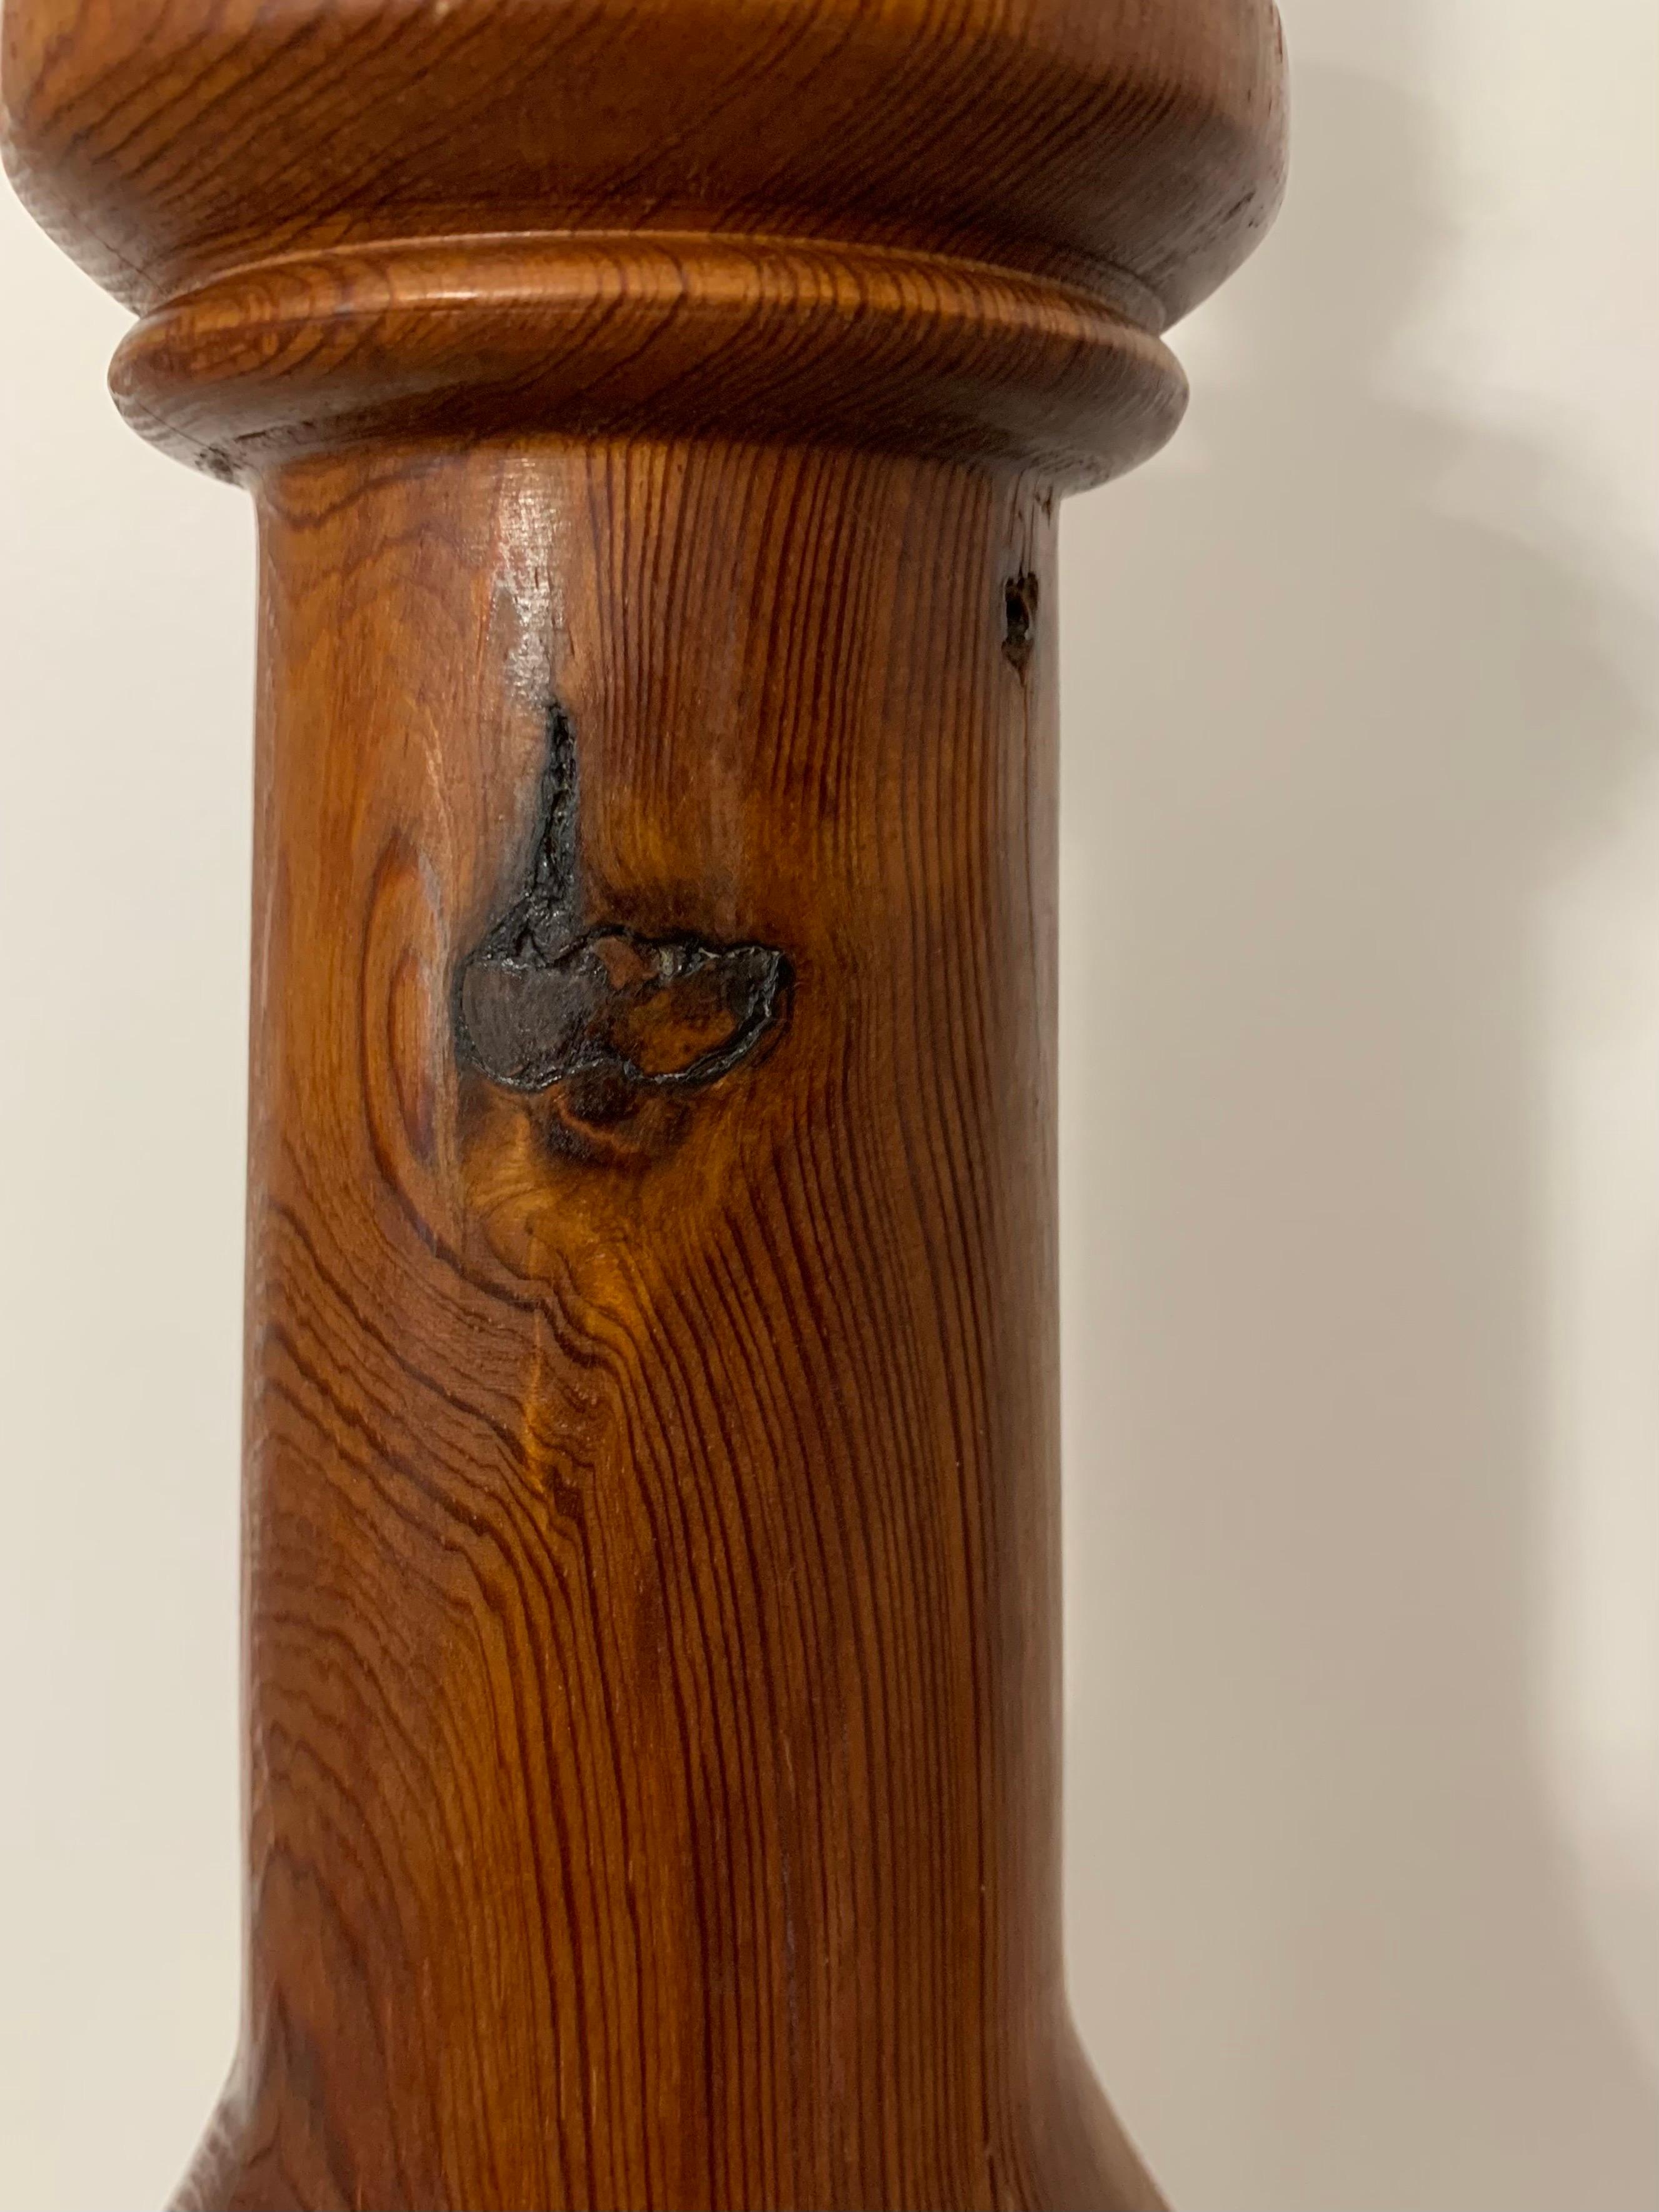 American Craft, Reclaimed Turned Wood Table Lamp, 1970s For Sale 1